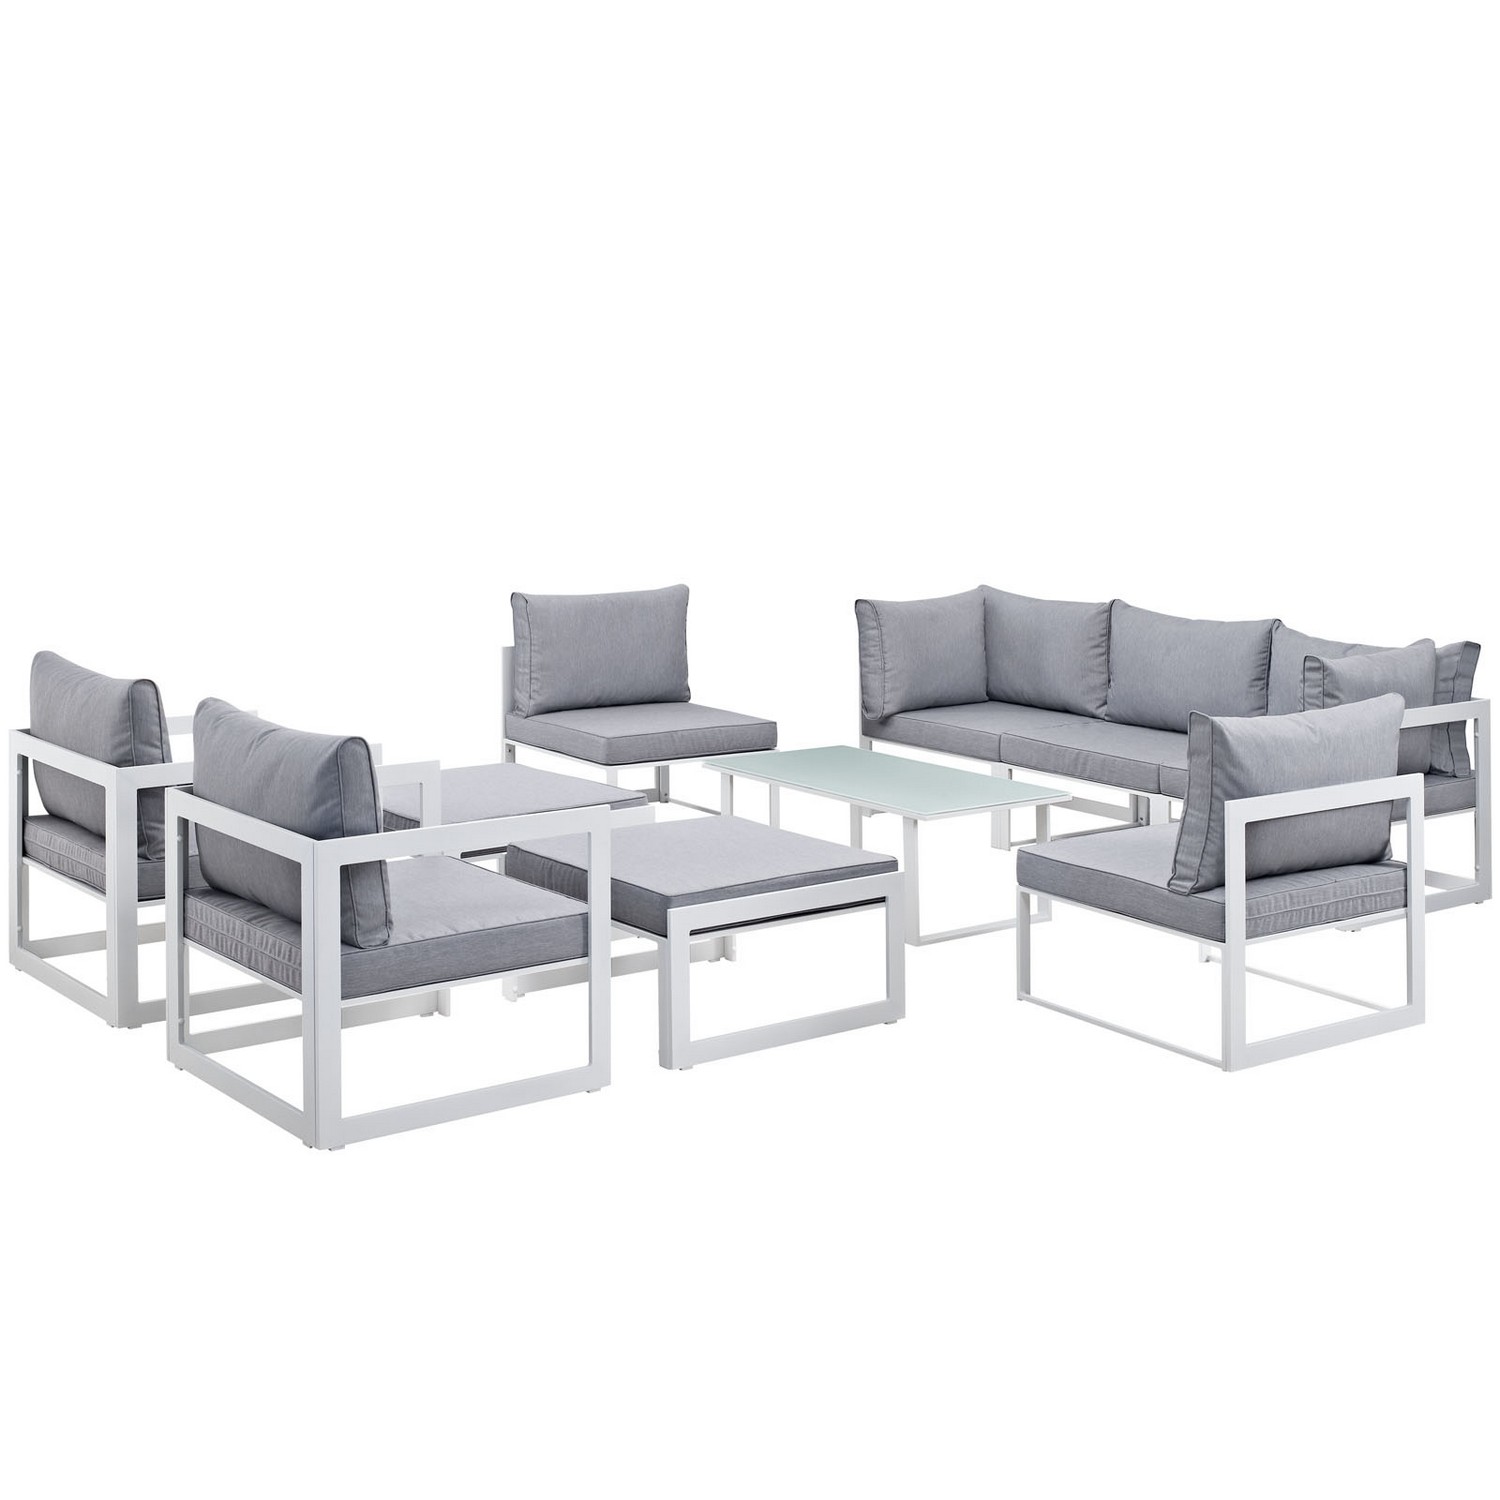 Modway Fortuna 10 Piece Outdoor Patio Sectional Sofa Set - White/Gray